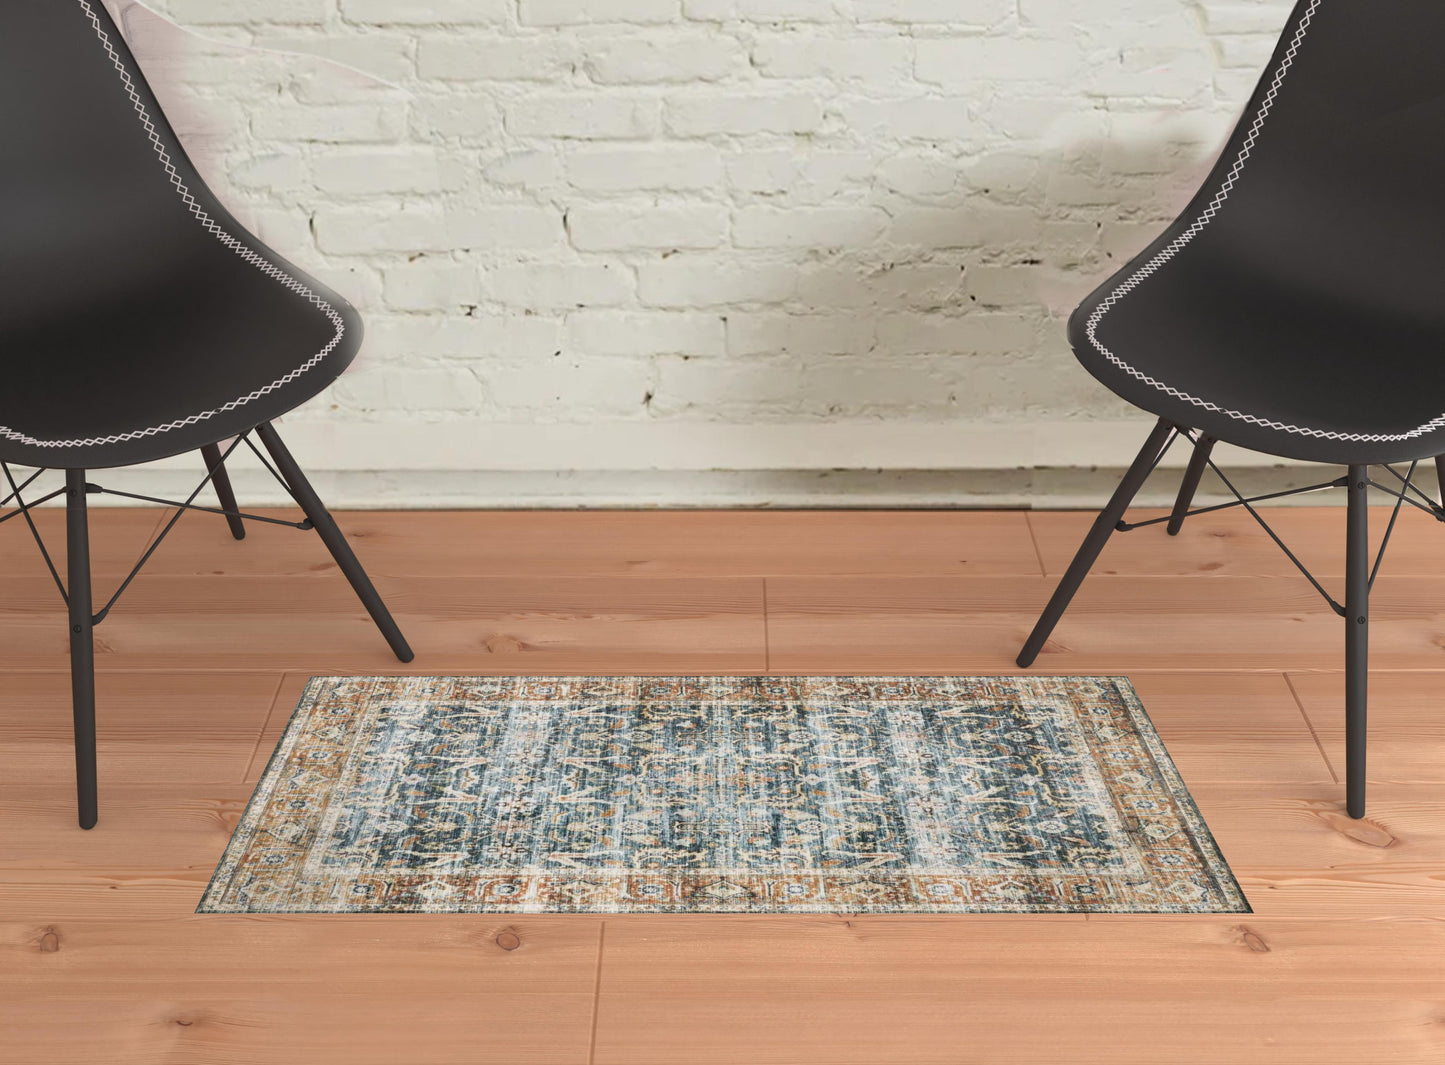 2' X 3' Blue Rust Gold And Olive Oriental Printed Stain Resistant Non Skid Area Rug